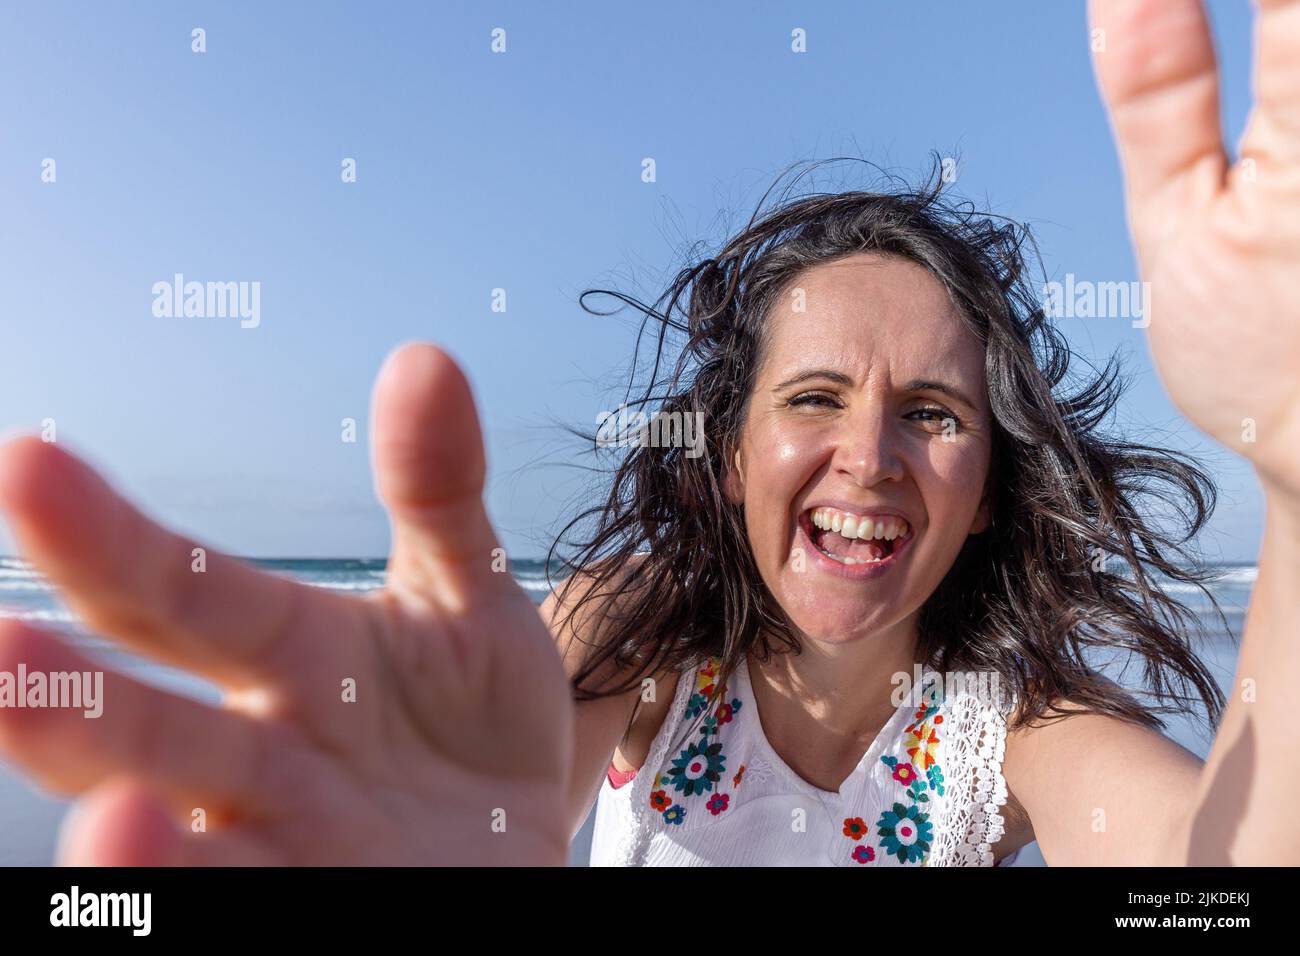 Optimistic middle aged woman with dark hair laughing and touching camera while having fun near sea against blue sky. Stock Photo